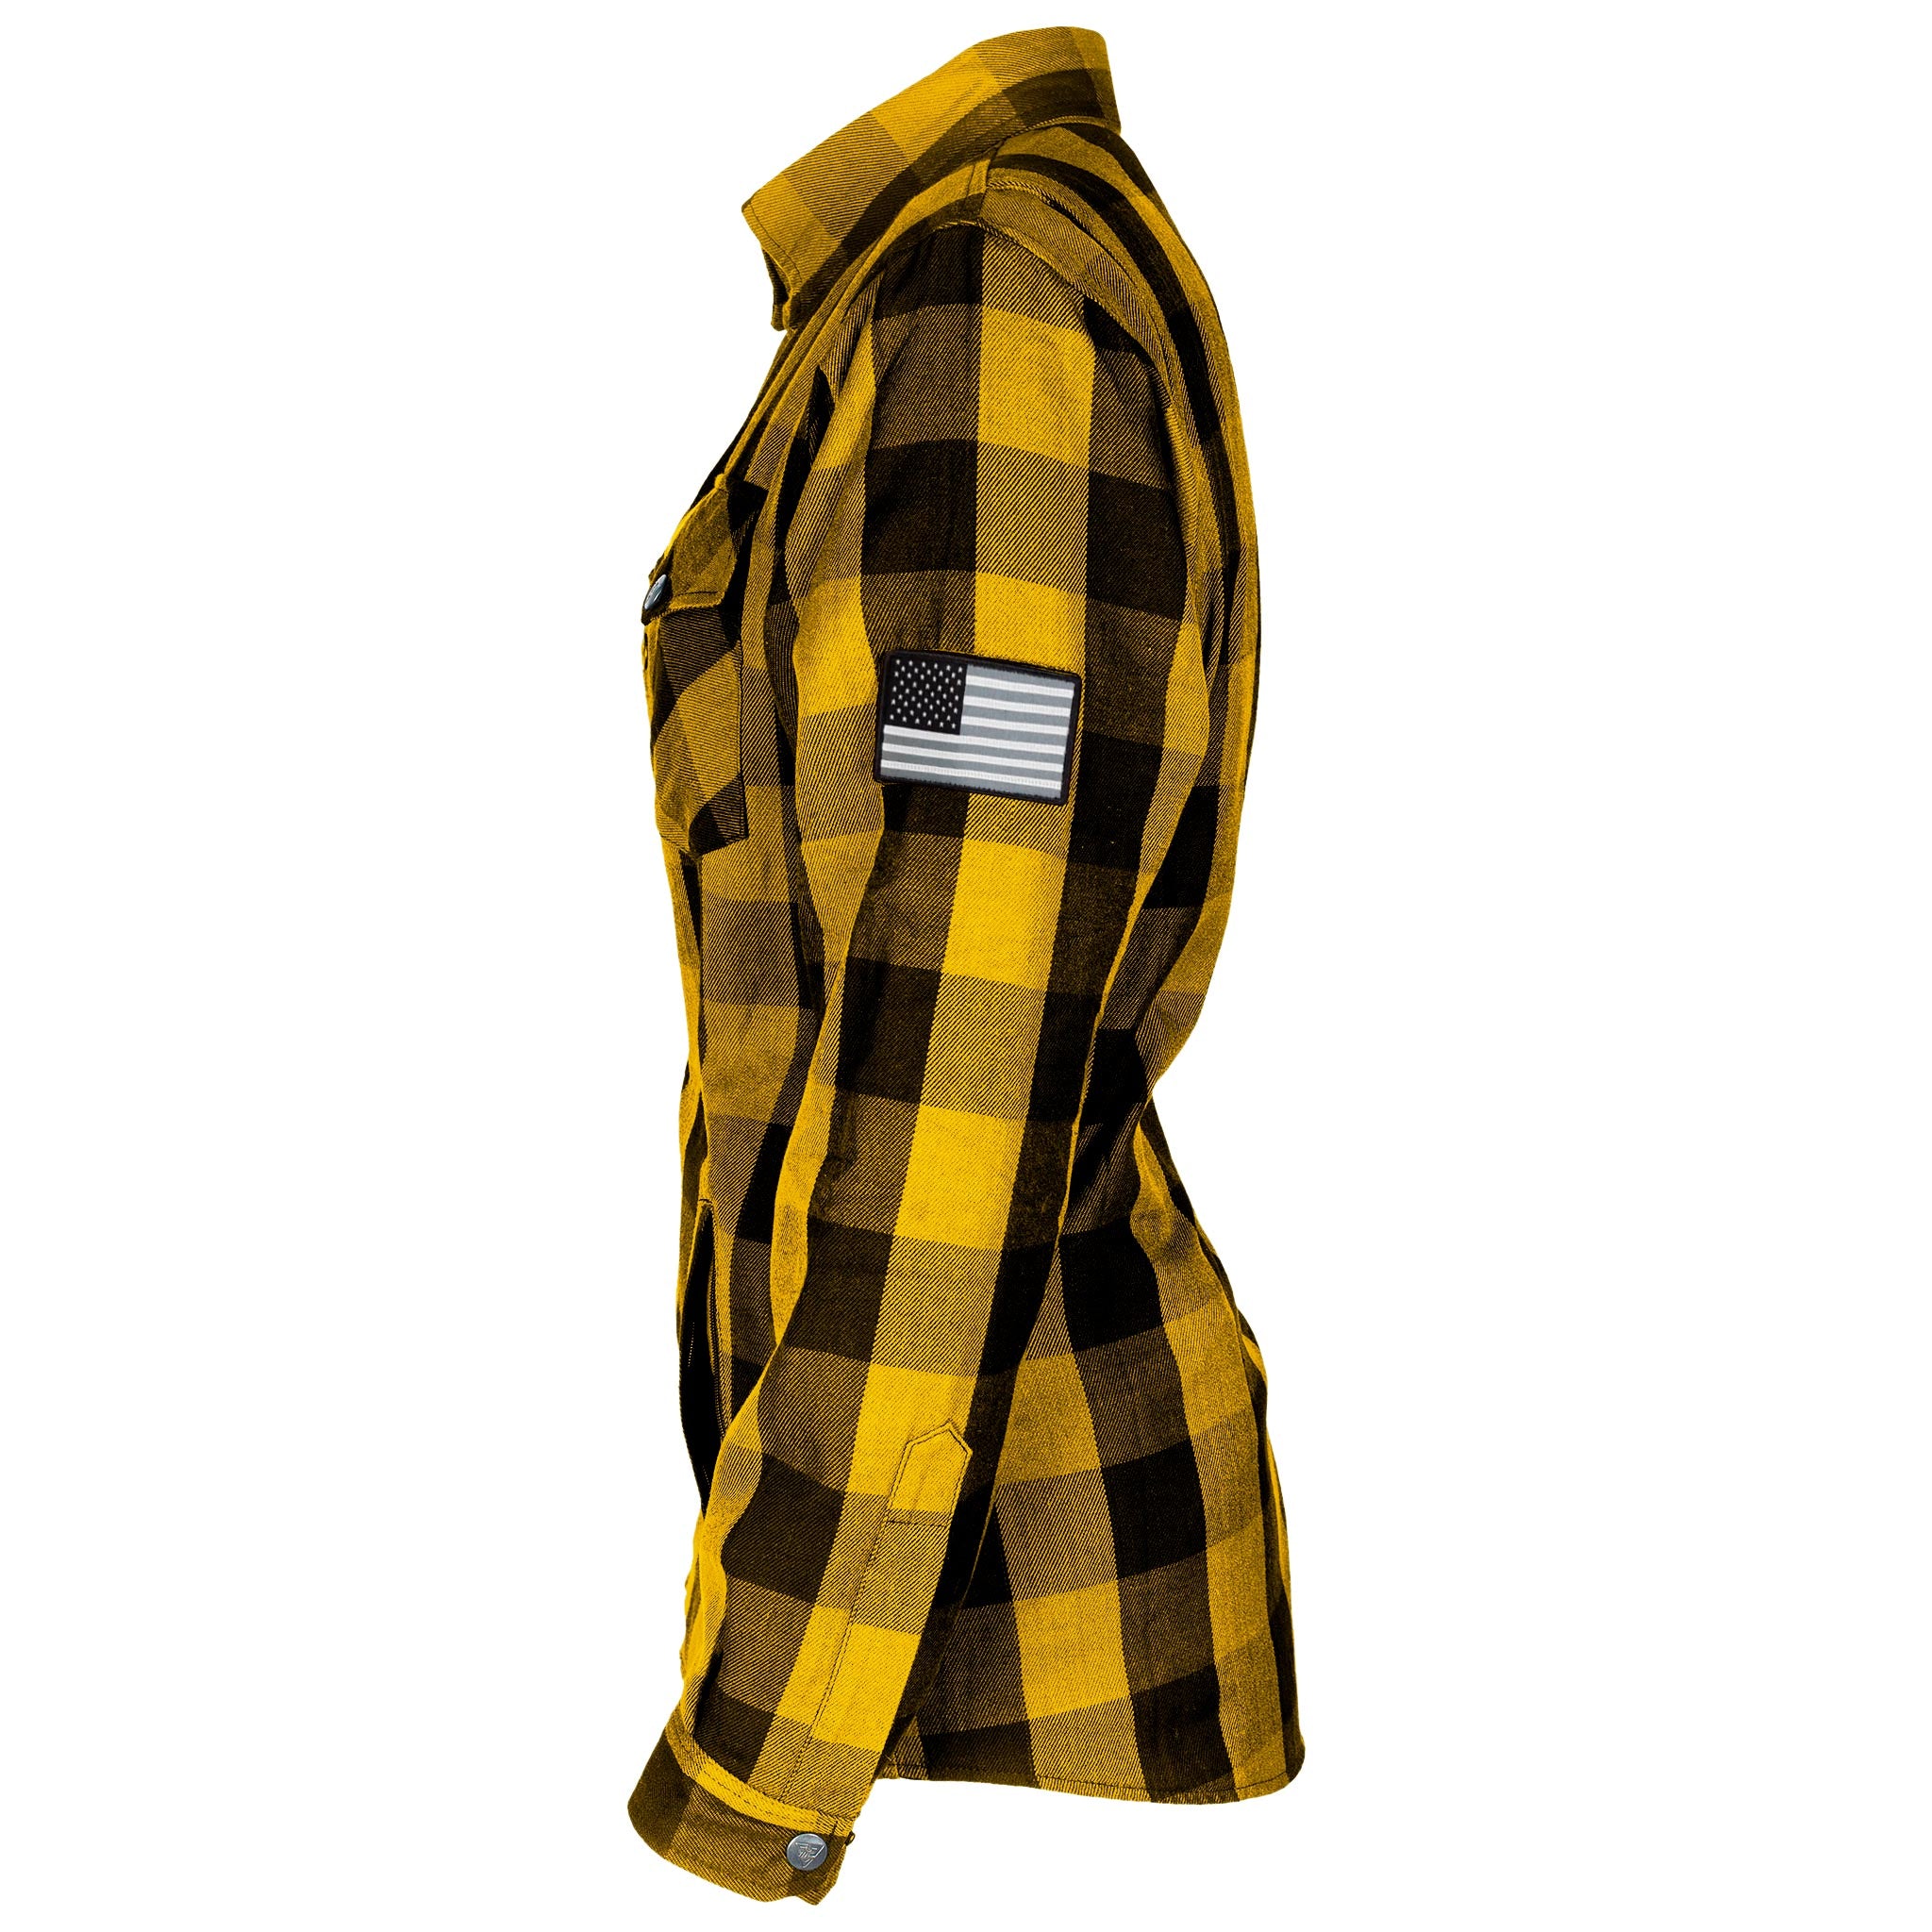 Protective Flannel Shirt for Women "Blaze of Glory" - Yellow and Black Checkered with Pads